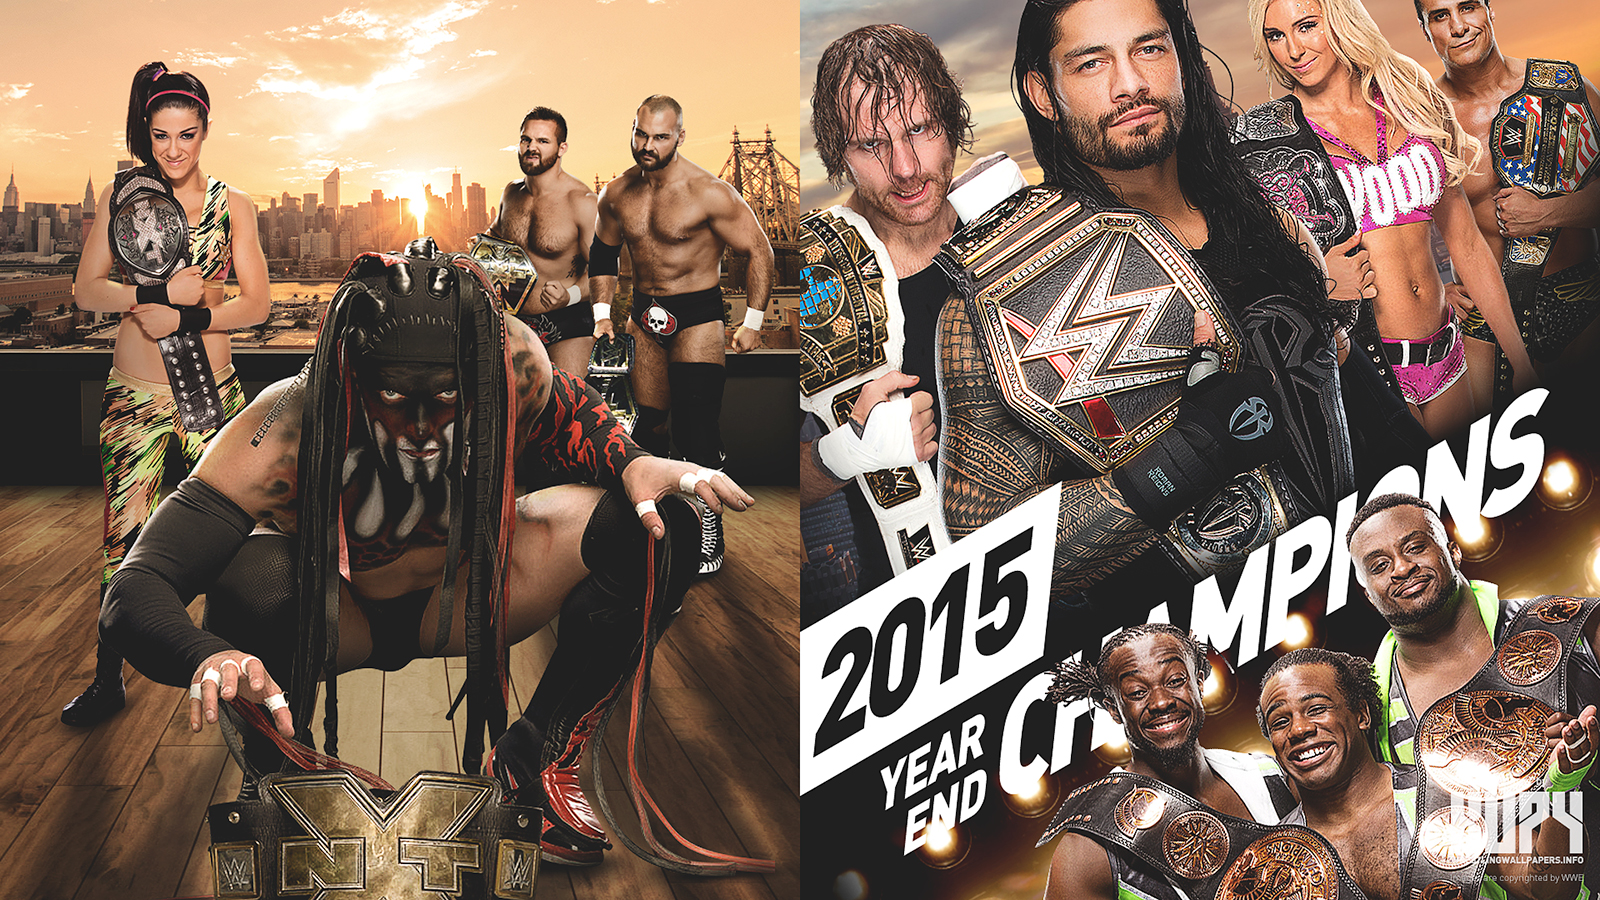 Wwe Image End Of The Year Champions HD Wallpaper And